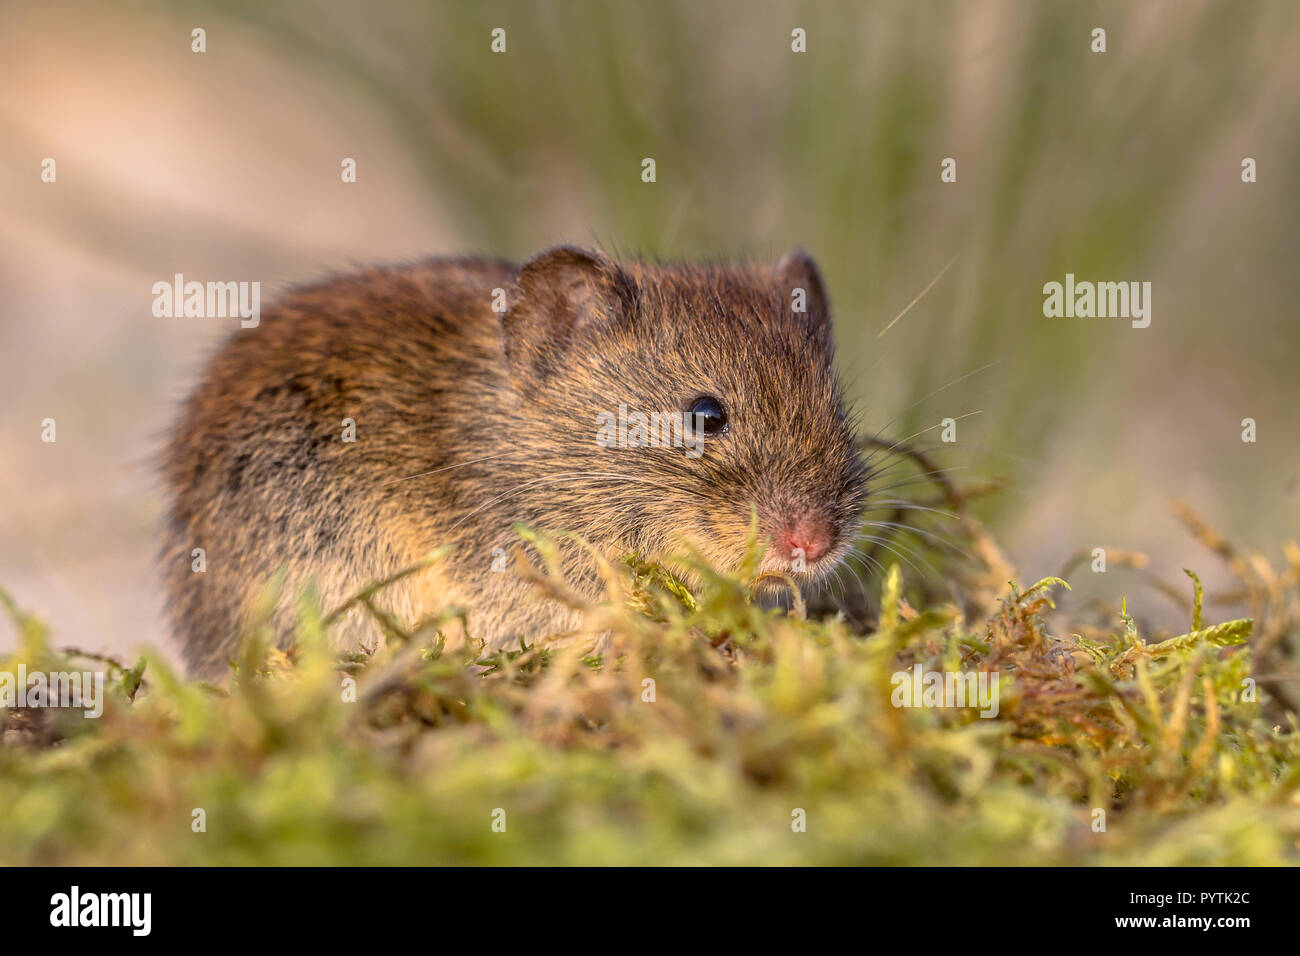 Bank vole (Myodes glareolus; formerly Clethrionomys glareolus). Small vole with red-brown fur in natural vegetation Stock Photo